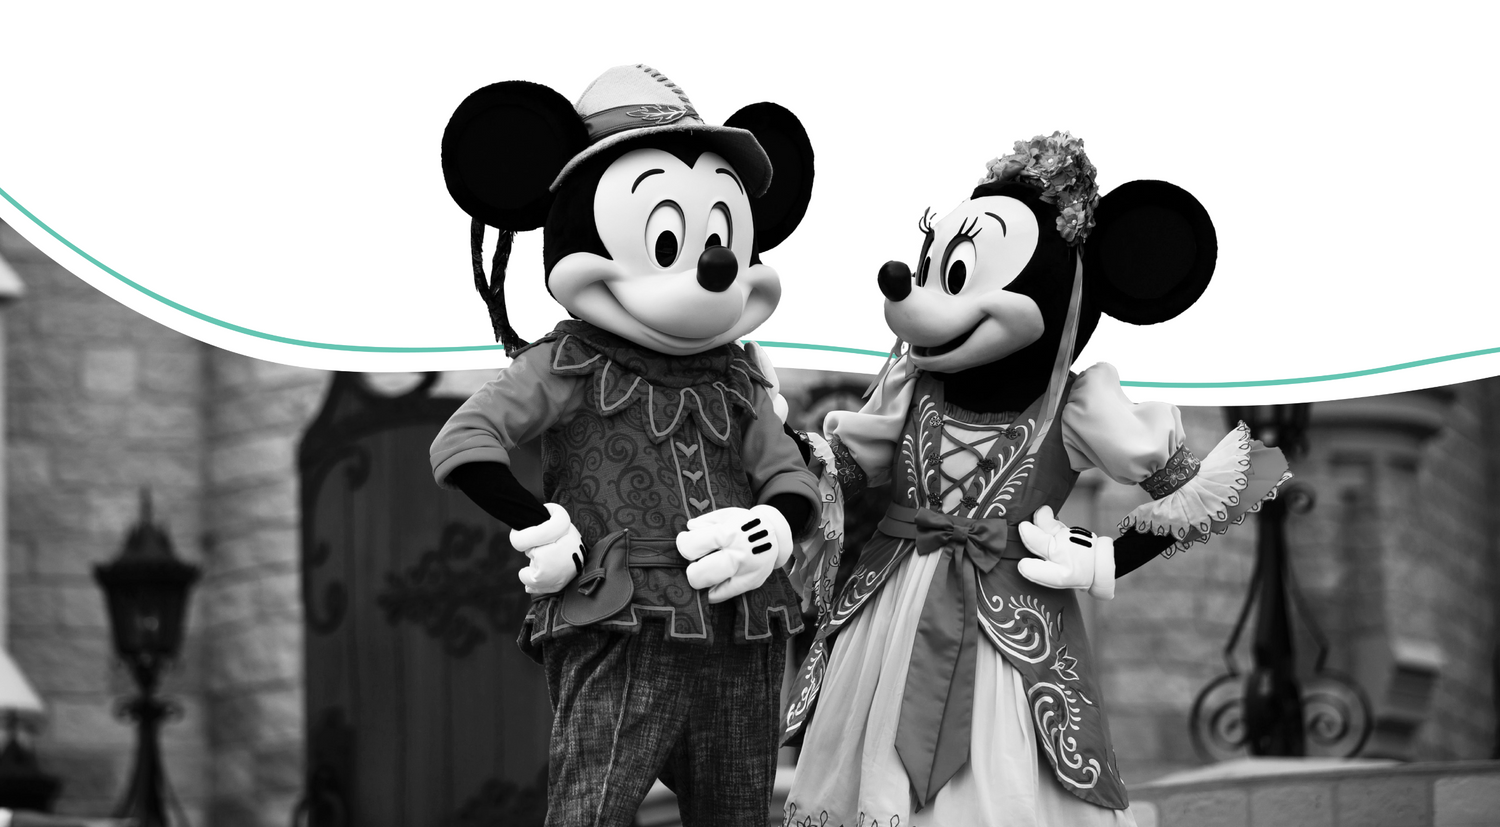 Micky + Mini Mouse in black and white